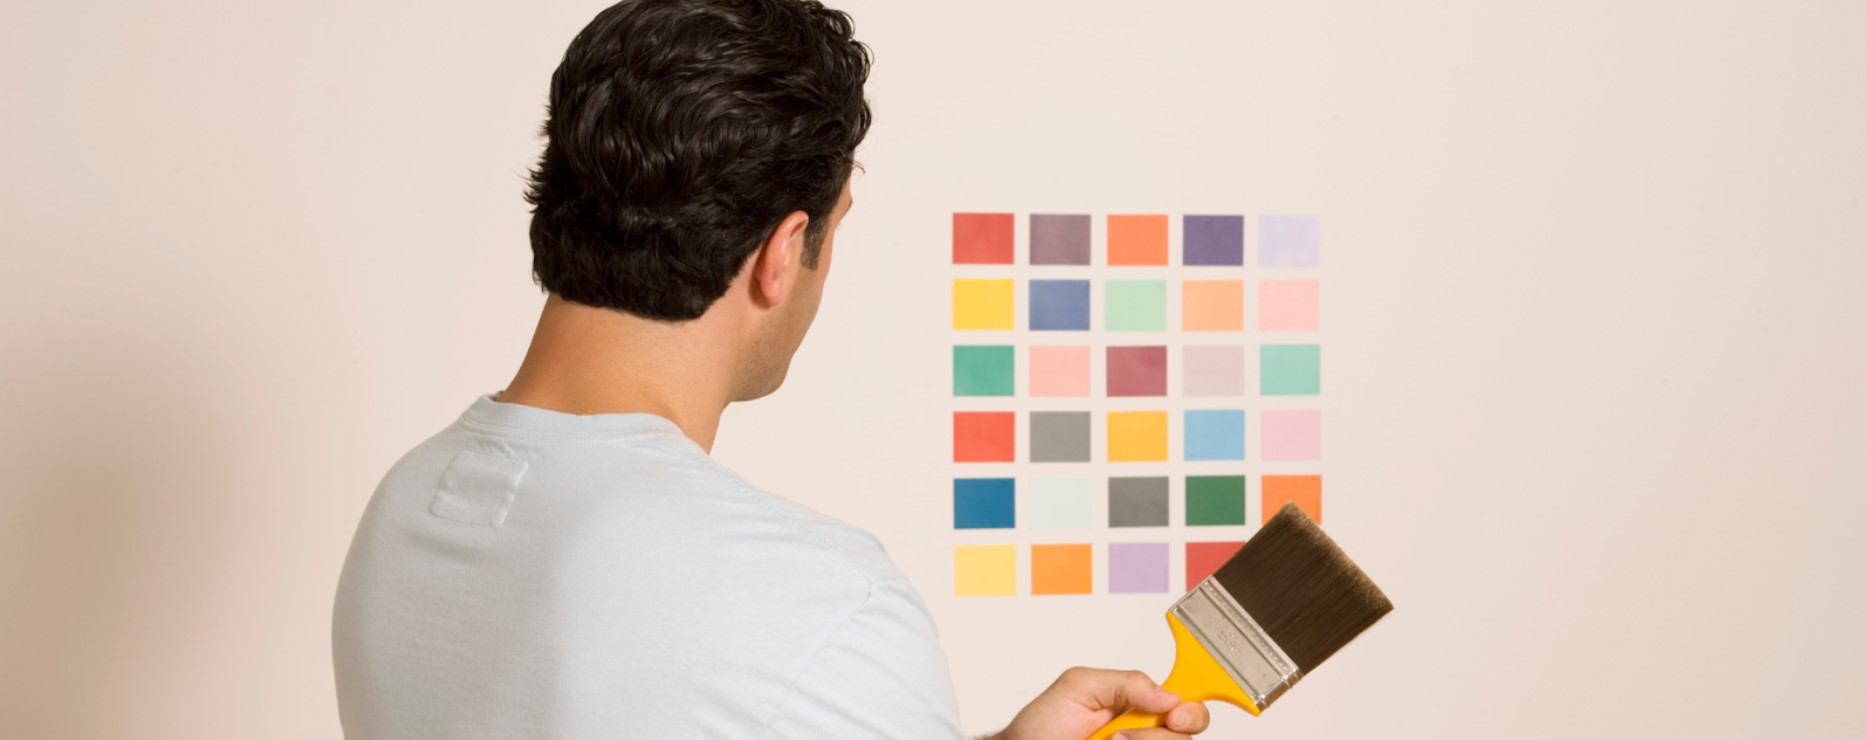 choosing colors for paint finish